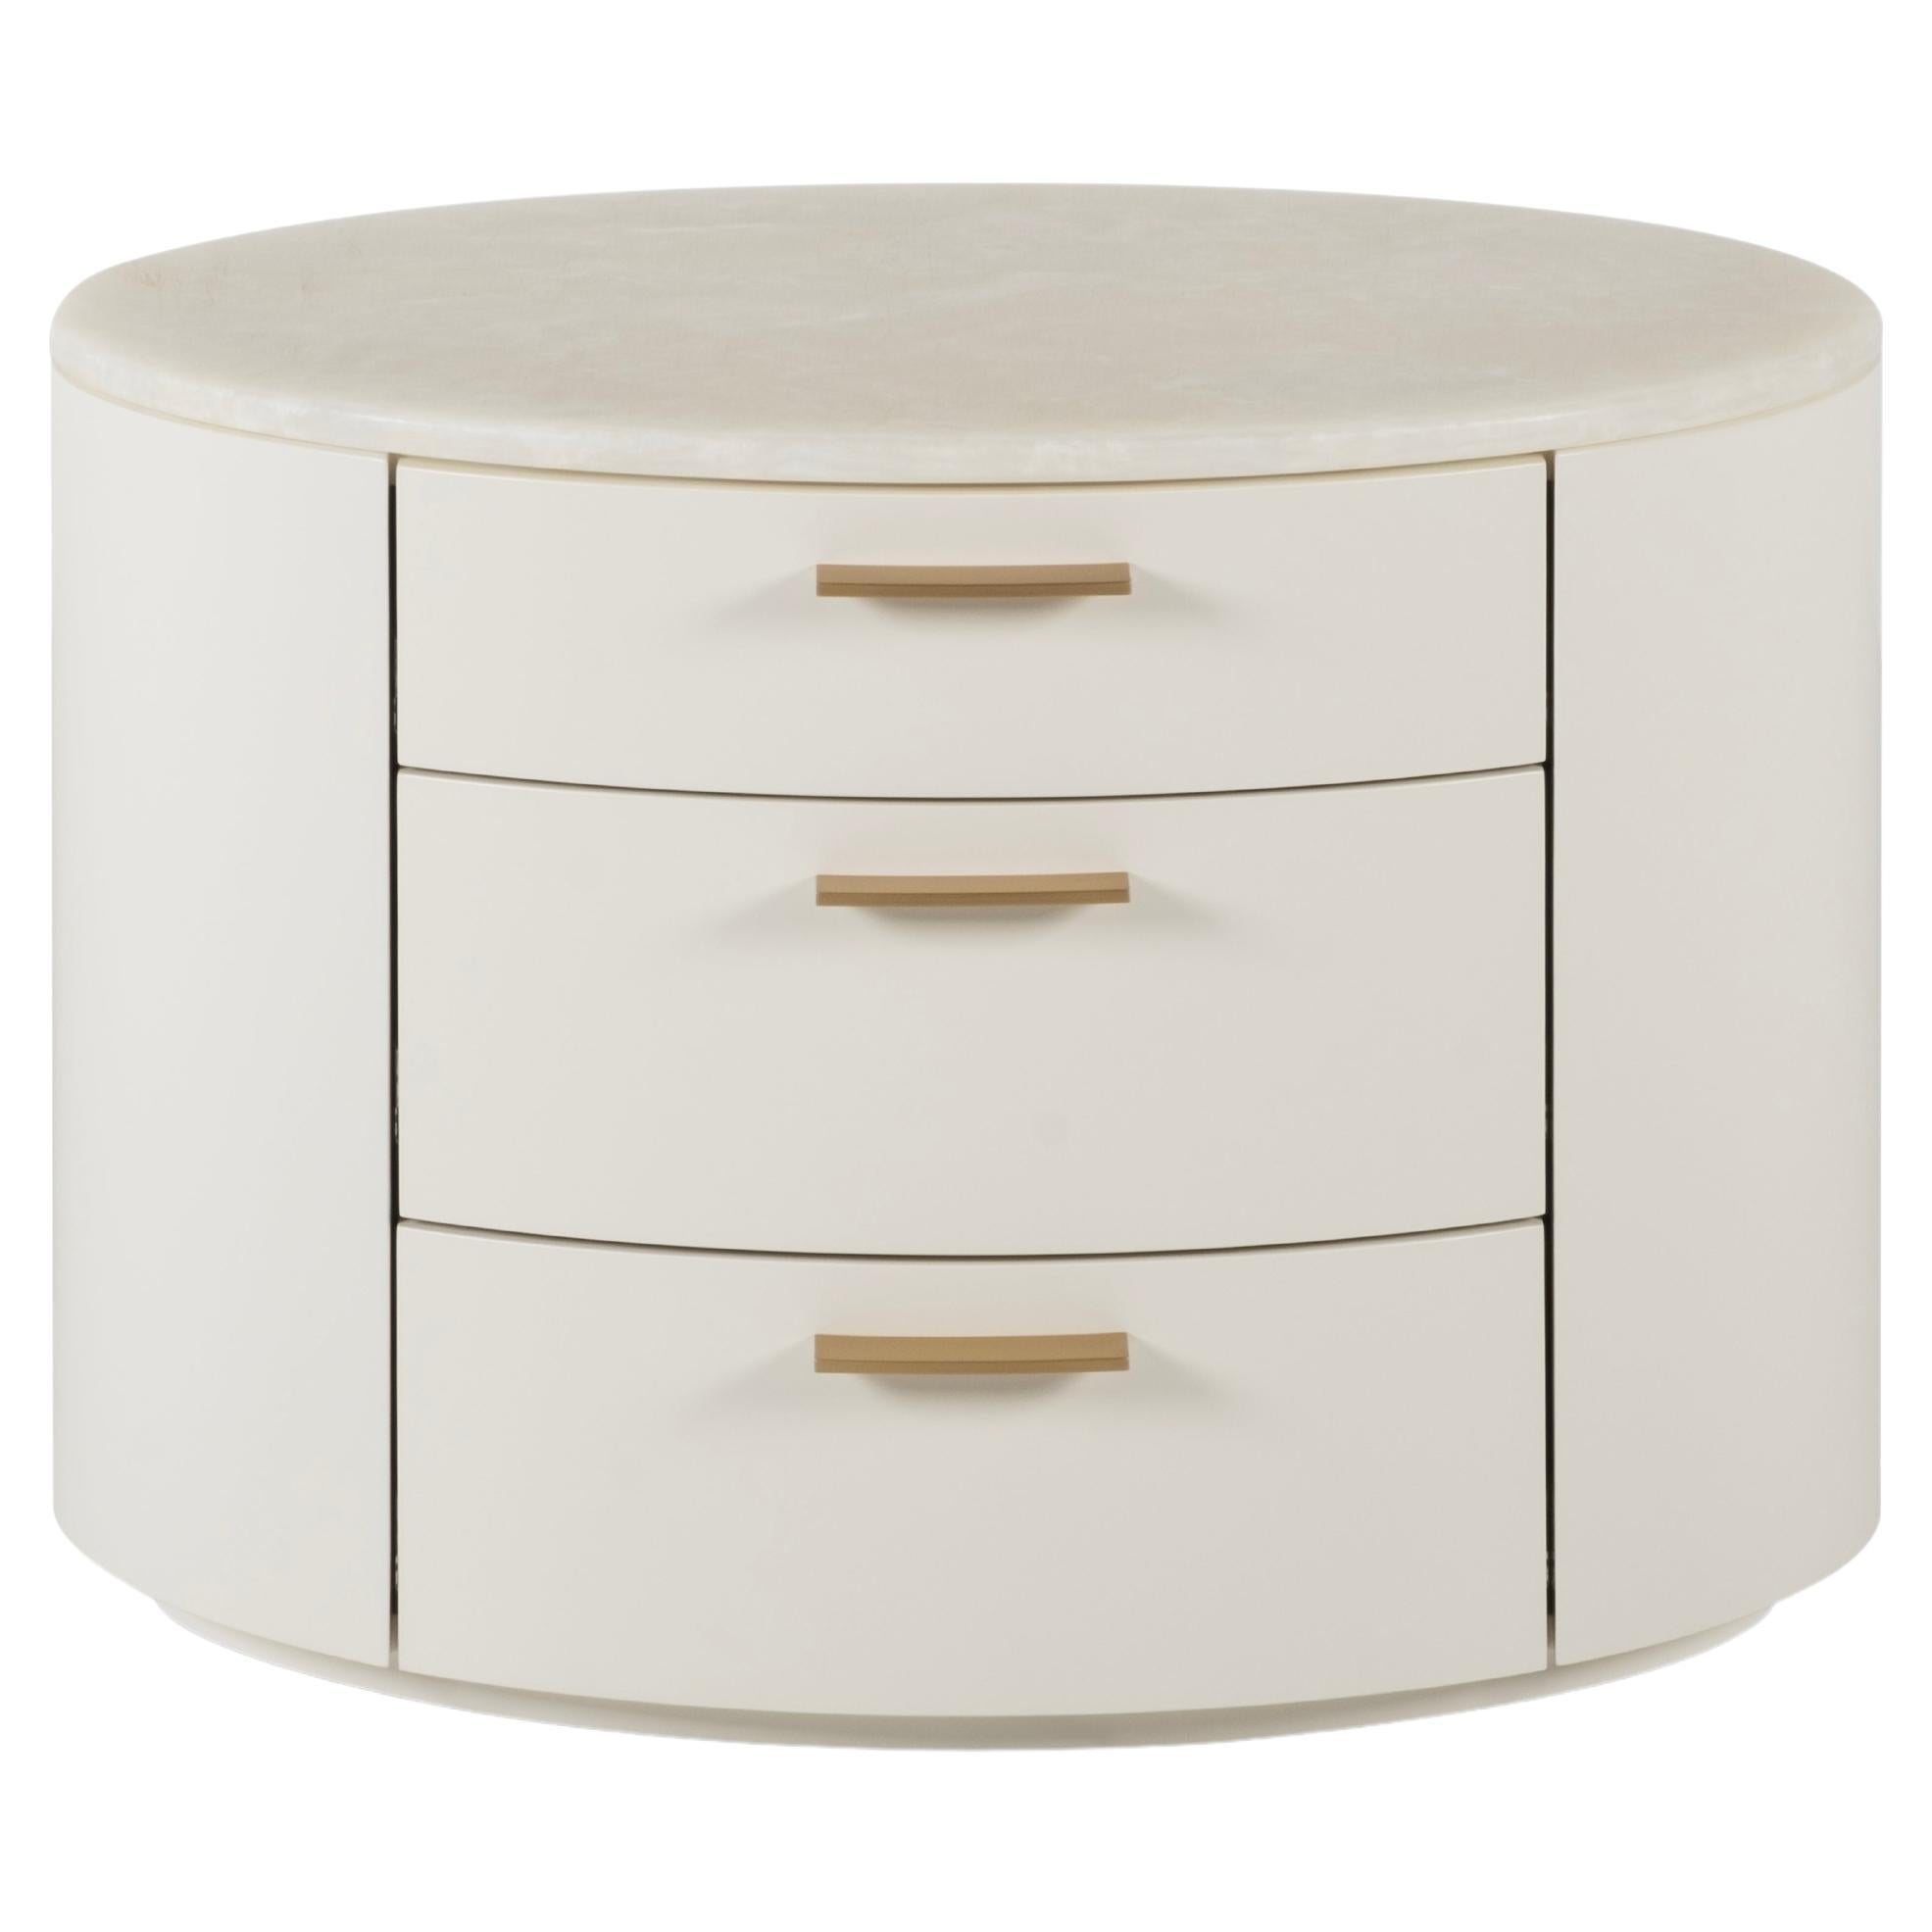 The Modern Nilo Nightstands Bedside Tables White Onyx Handmade Portugal Greenapple